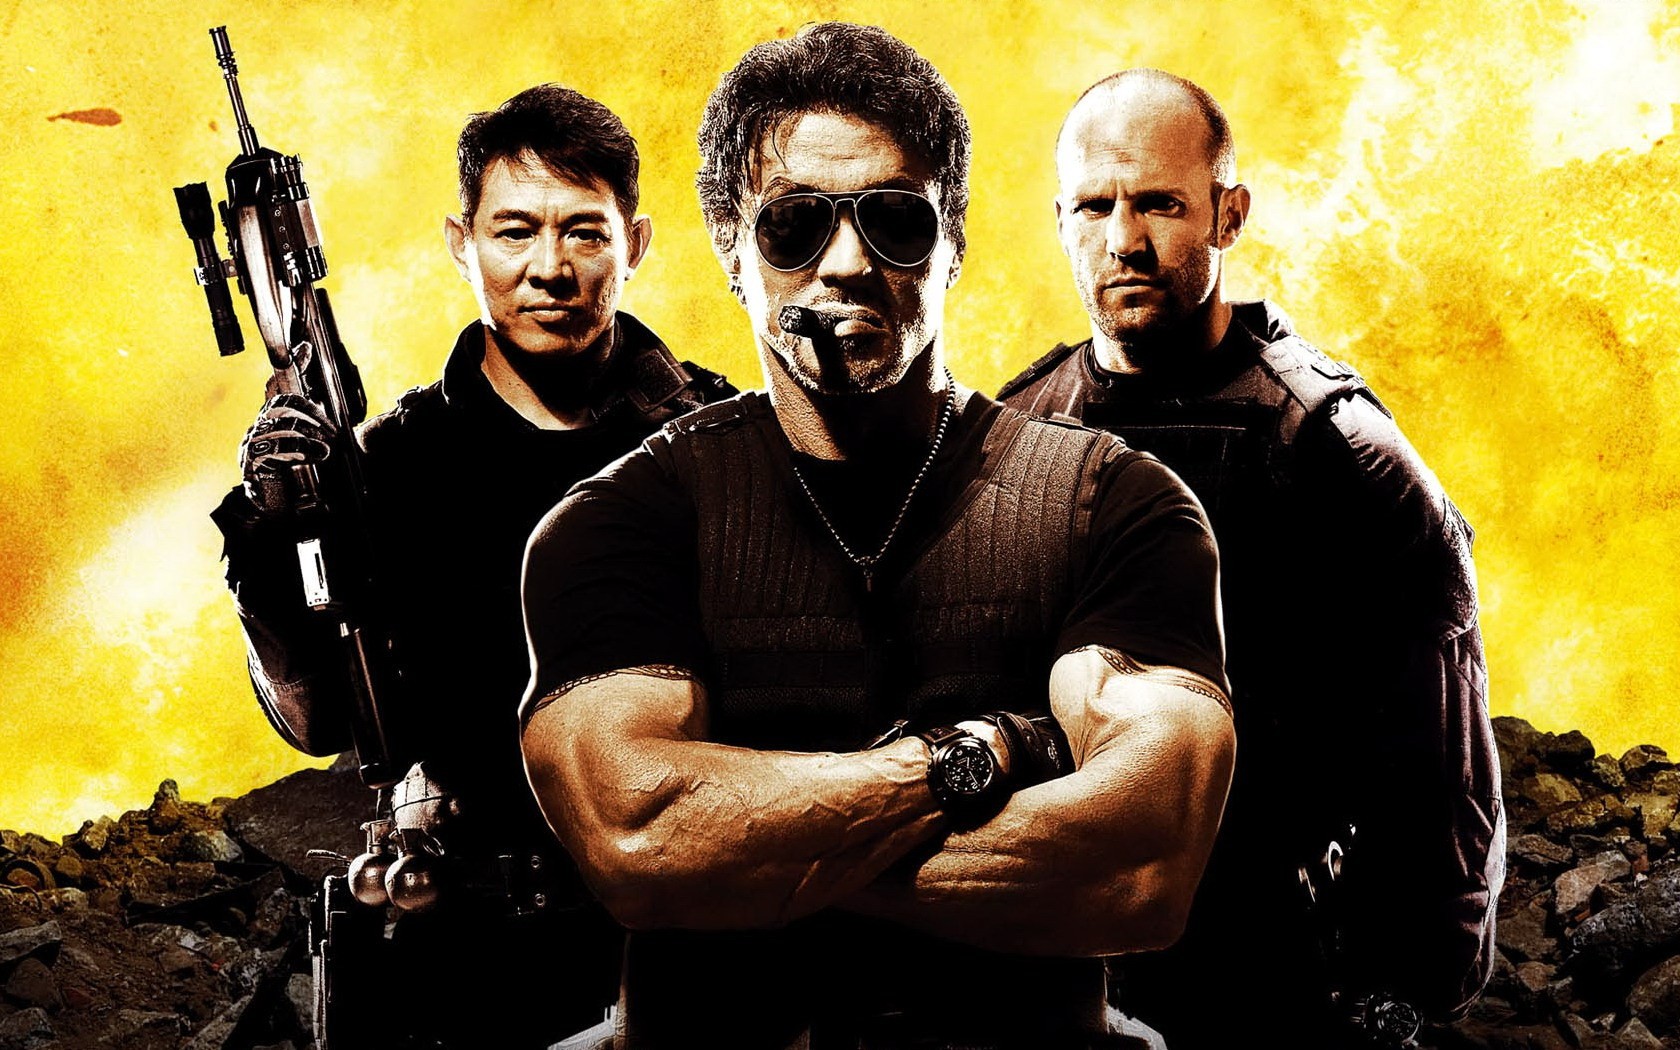 Barney Ross Sylvester Stallone The Expendables Lee Christmas Jason Statham Yin Yang The Expendables  1680x1050